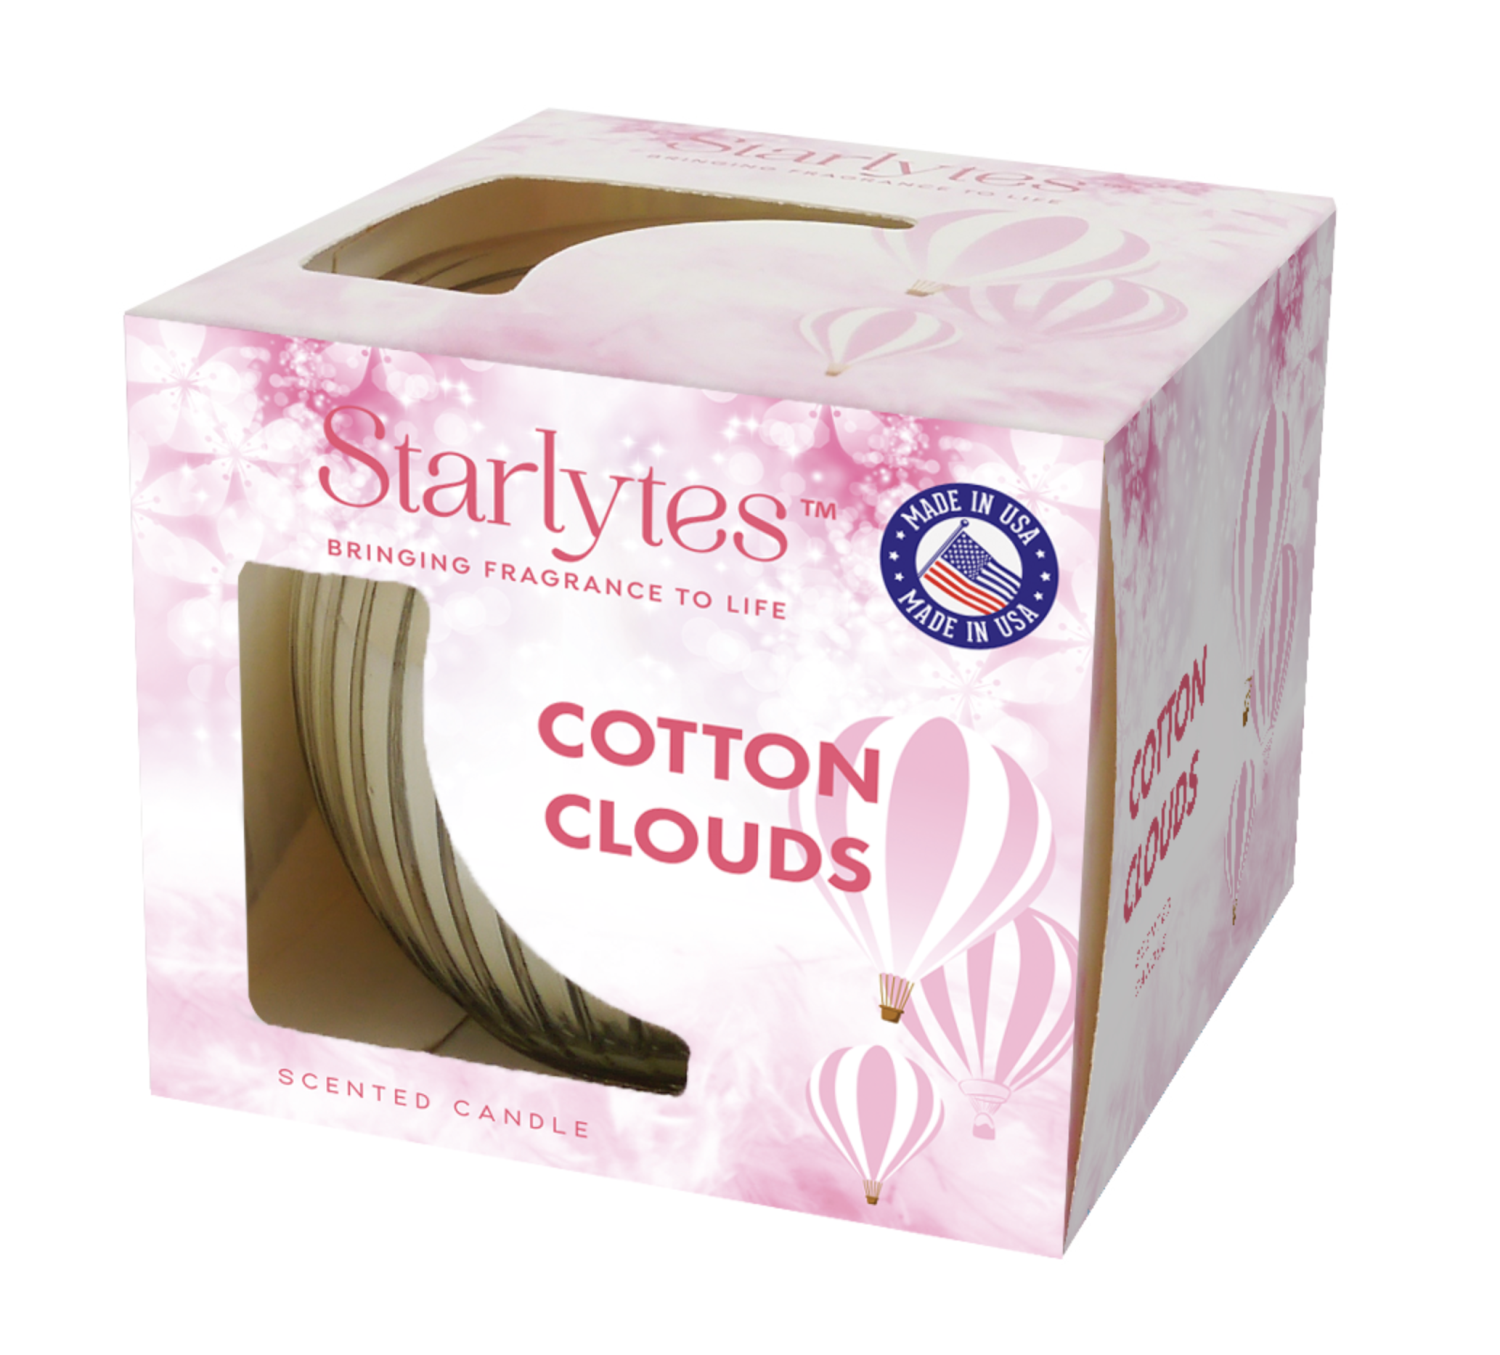 Starlytes Cotton Clouds Candle 85g